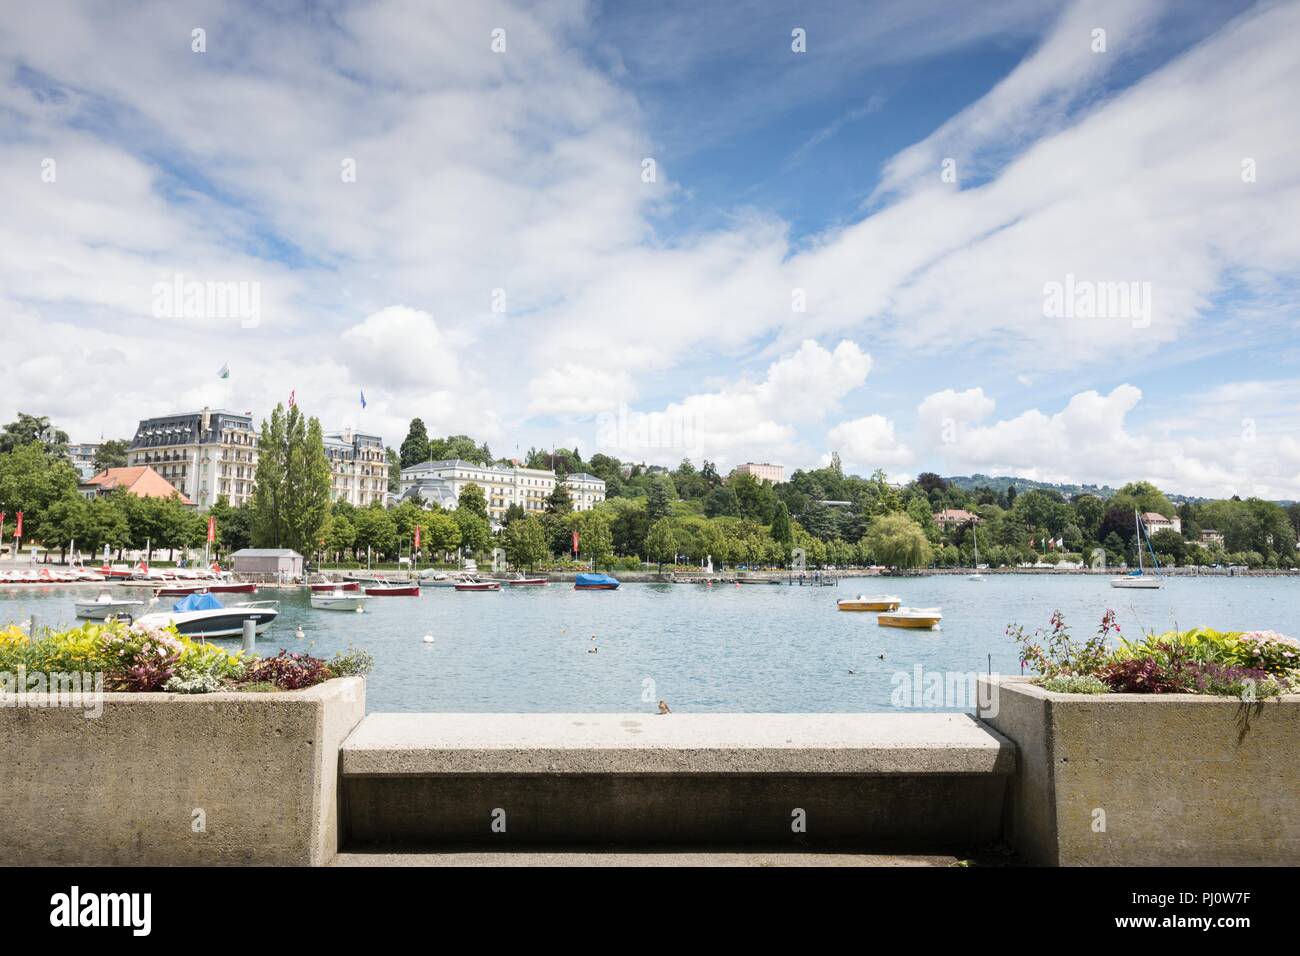 Peaceful view of Lake Geneva with some boats and buildings, Lausanne, Switzerland Stock Photo